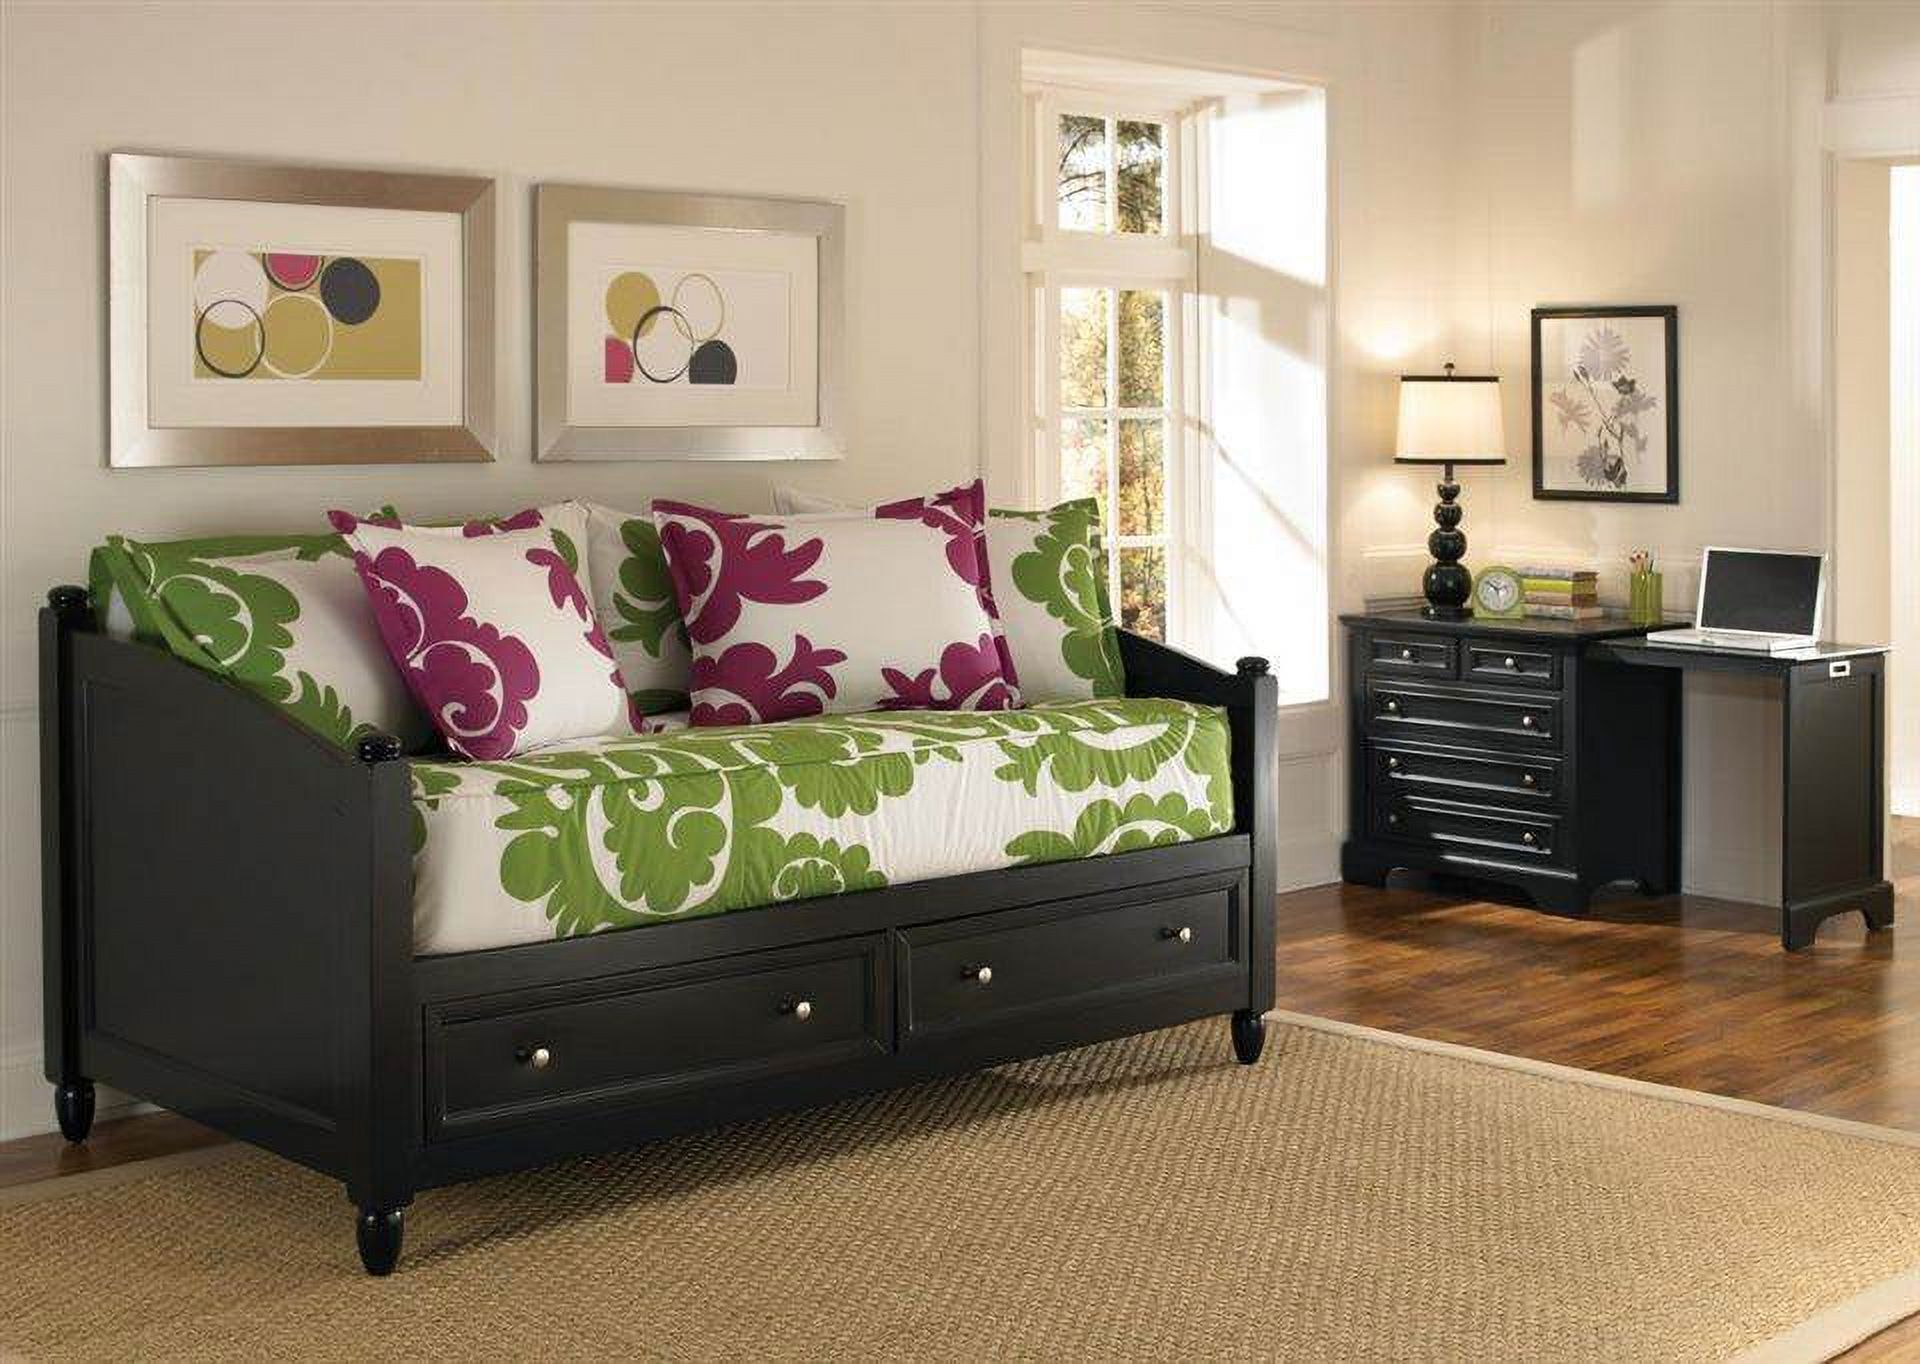 2-Drawer Daybed in Black Finish - image 3 of 3